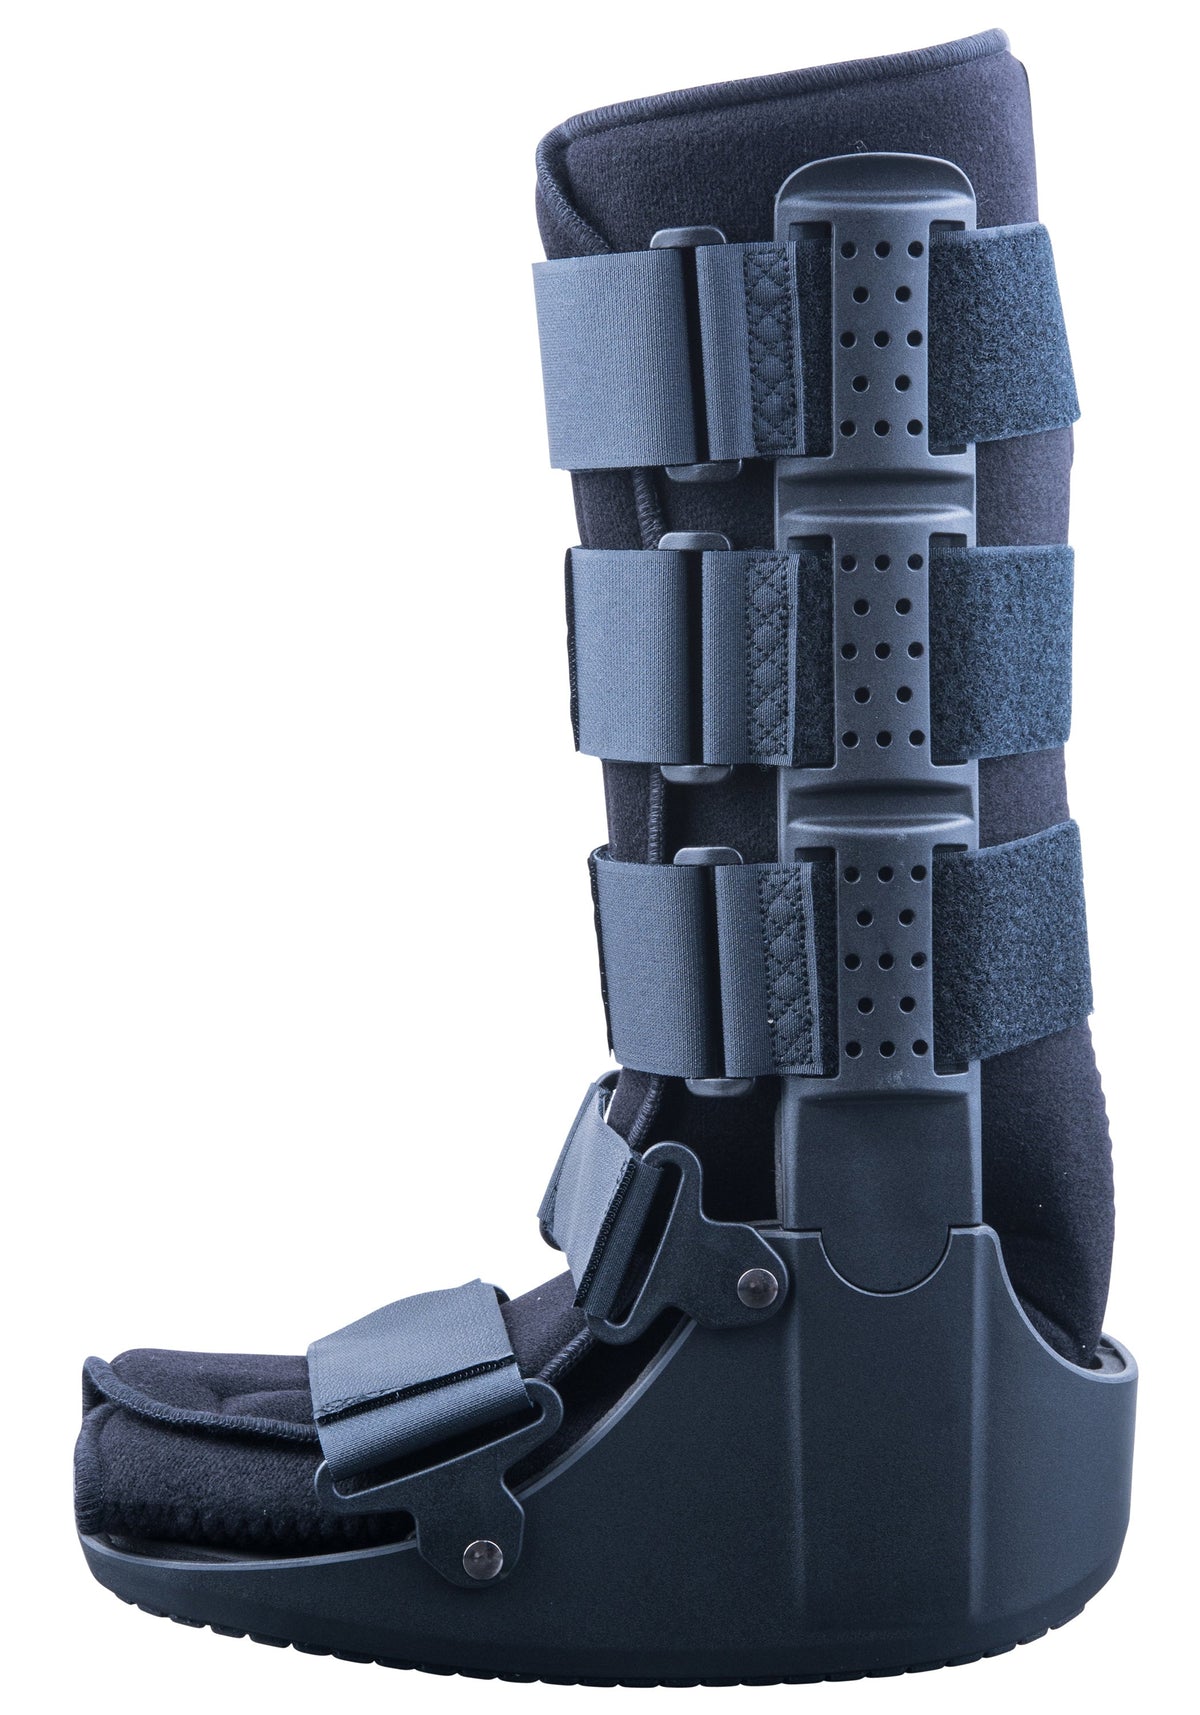 Mars Wellness Premium Polymer Tall Cam Walker Fracture Ankle/Foot Stabilizer Boot - Mars Med Supply